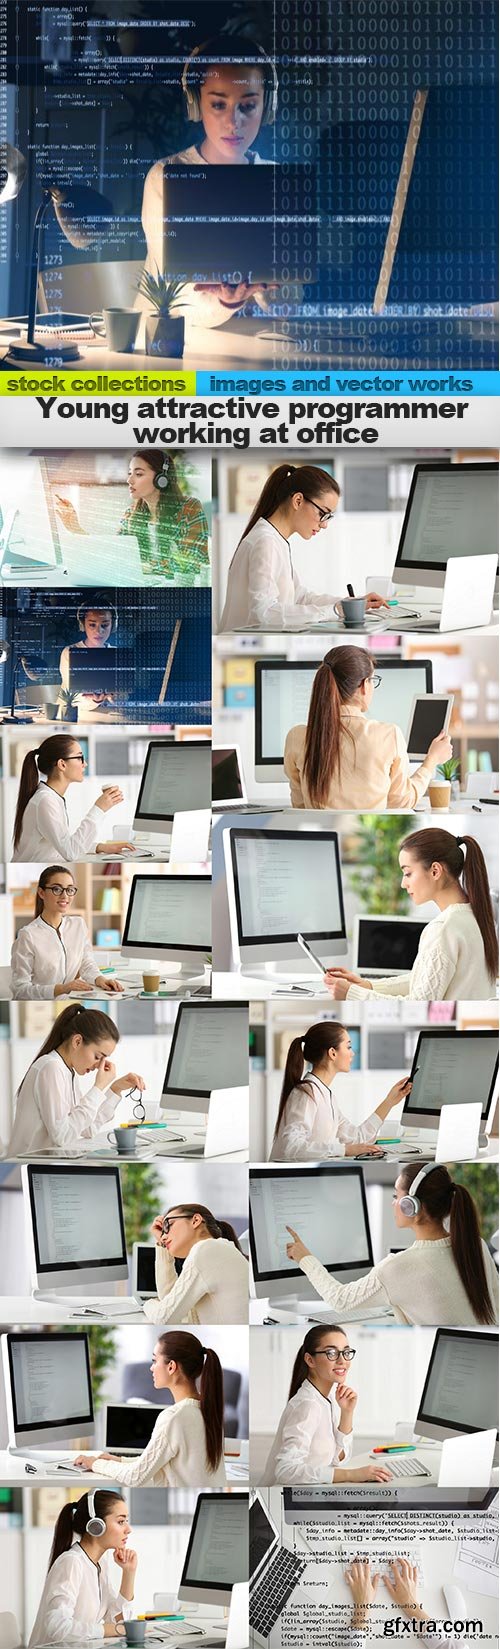 Young attractive programmer working at office, 15 x UHQ JPEG